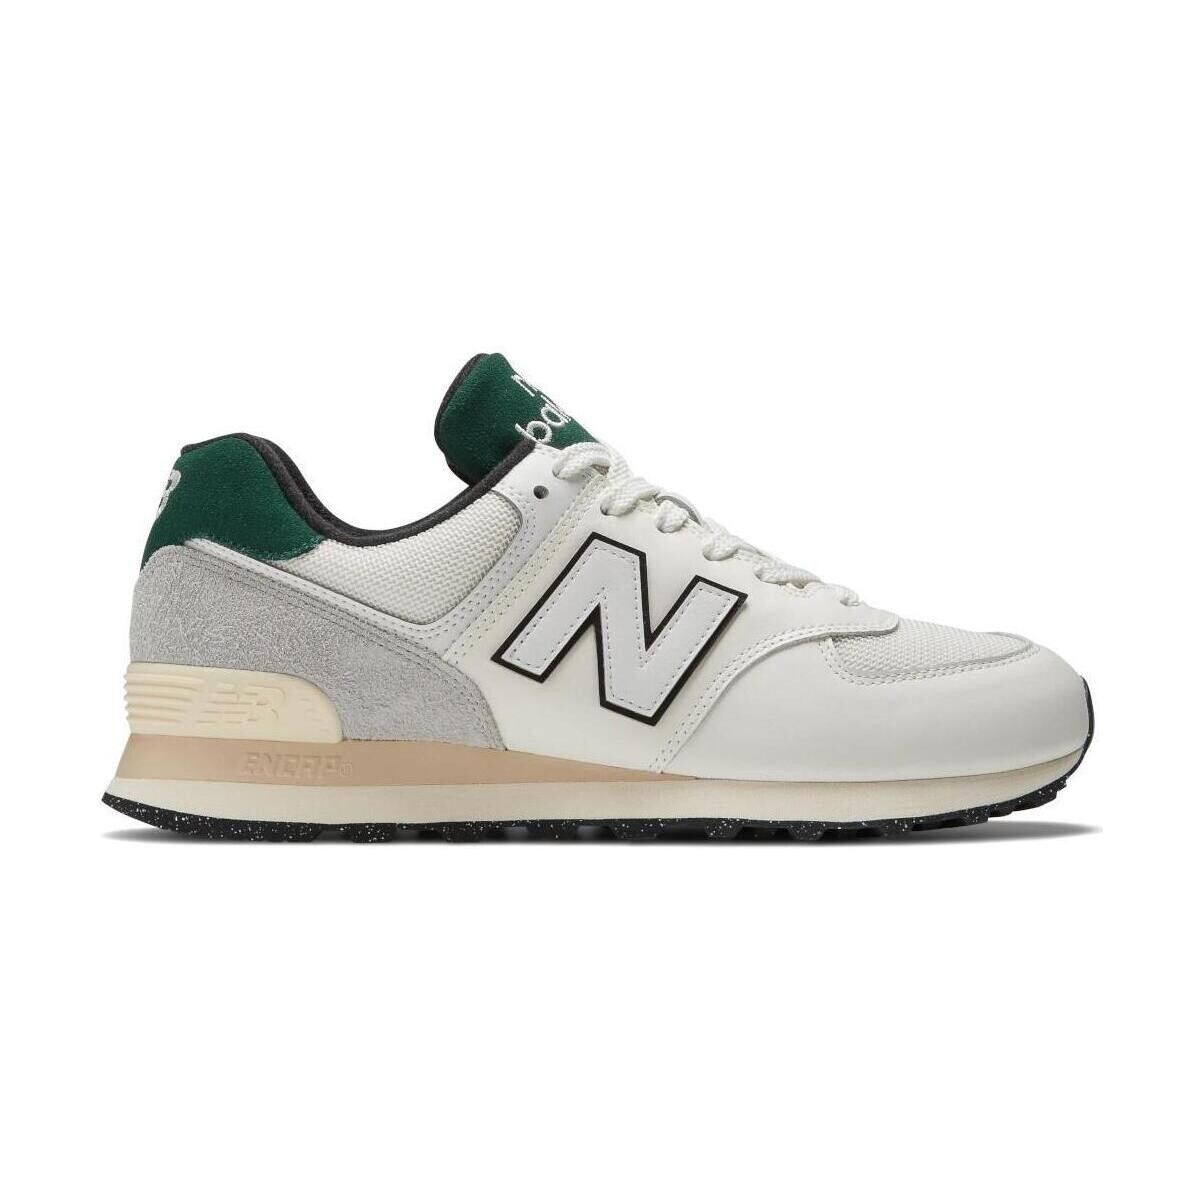 Chaussures Homme Baskets basses New Balance  Beige